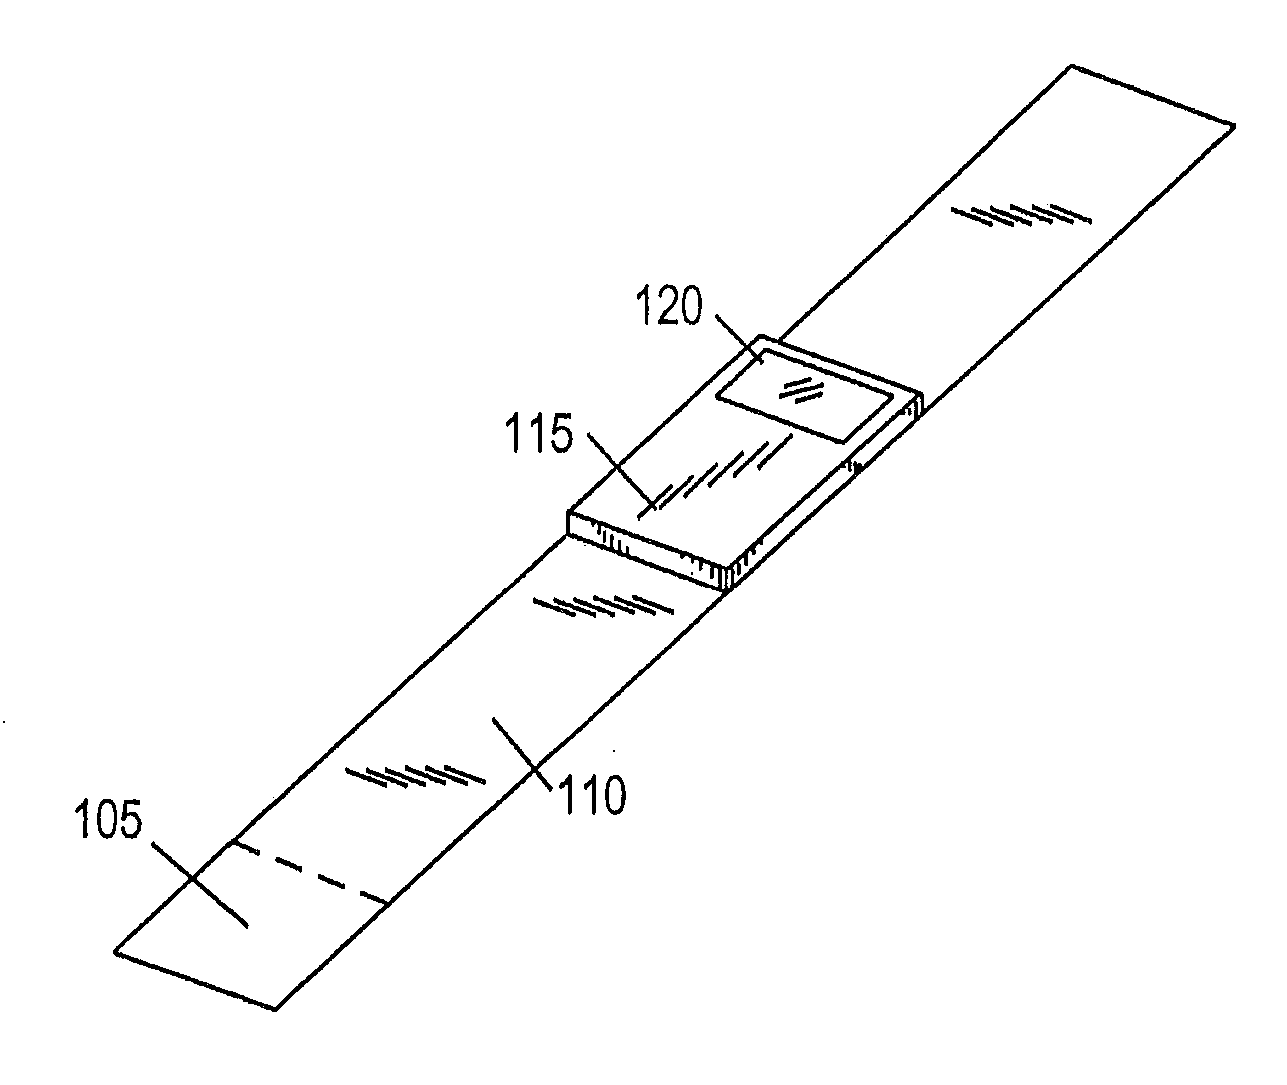 Methods for Detecting and Recording Activity and Devices for Performing the Same